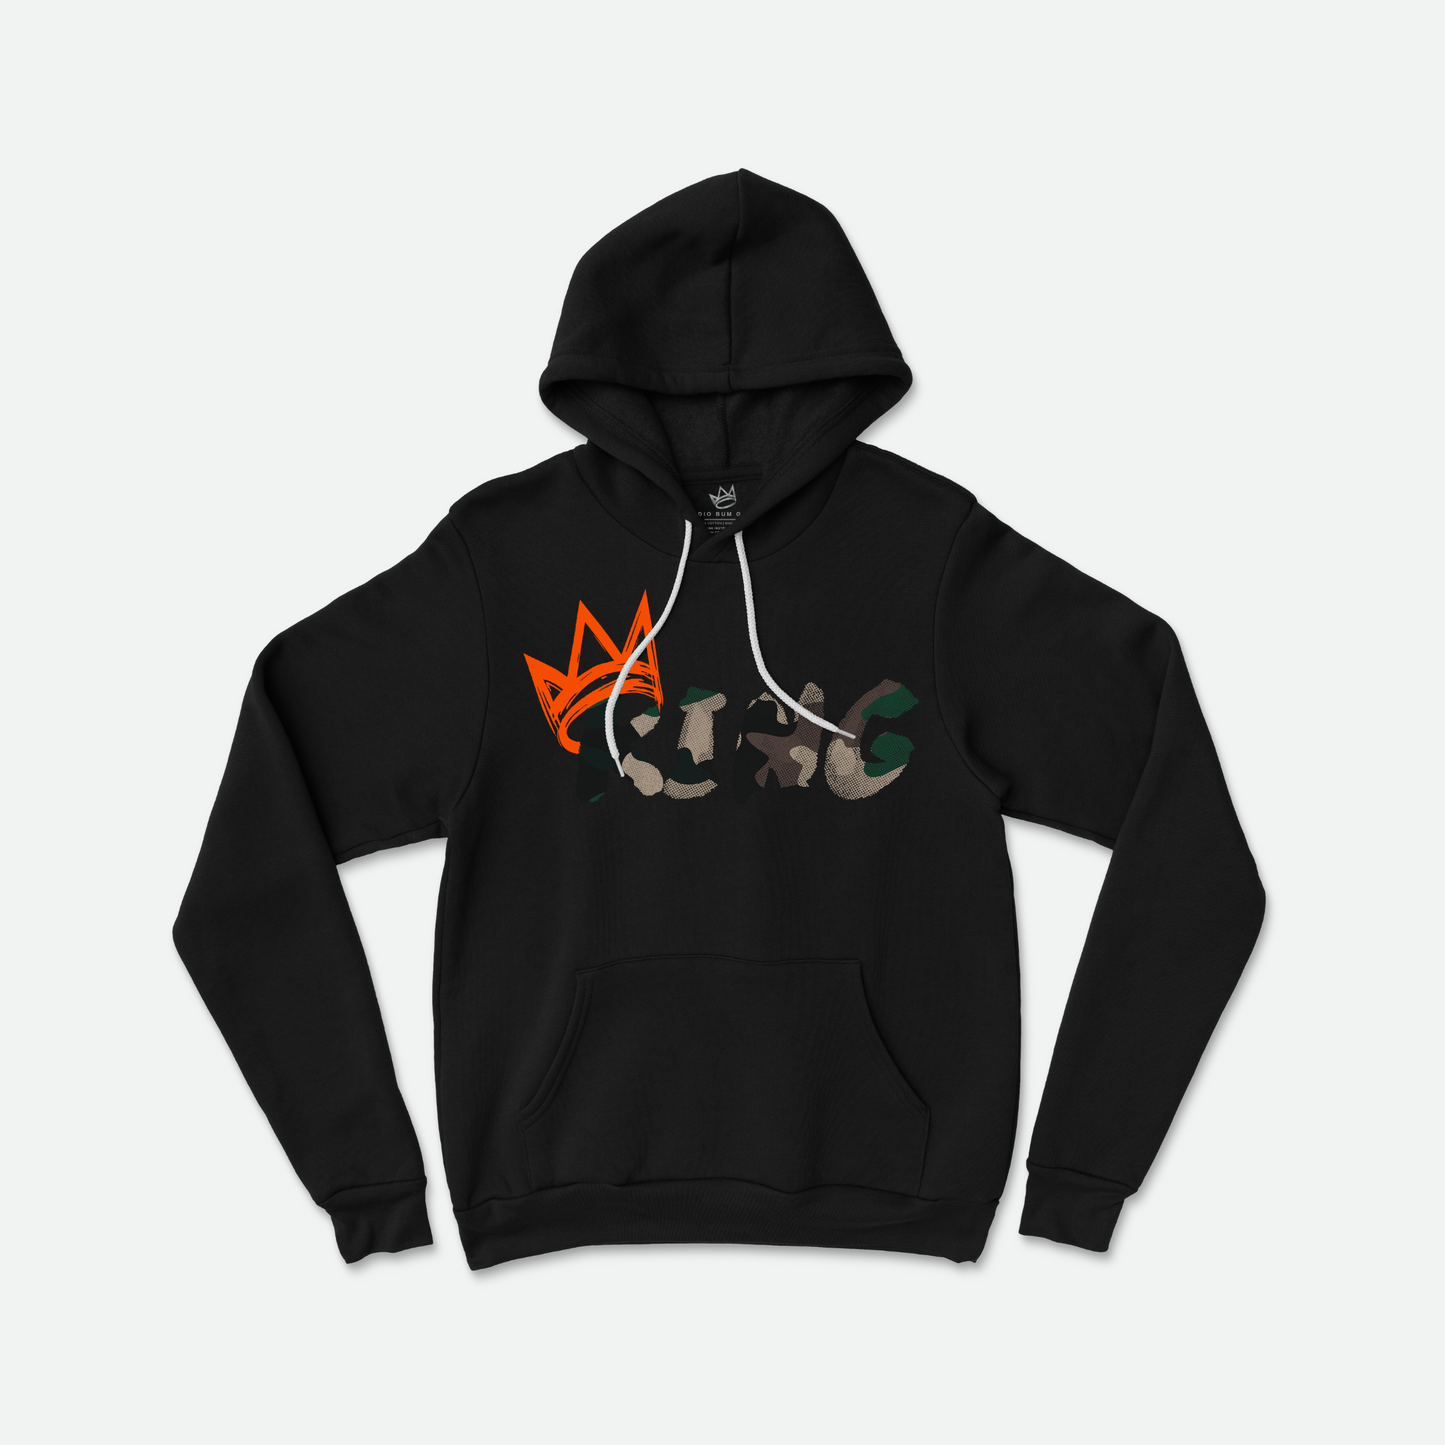 King Camouflage Collection Hoodies